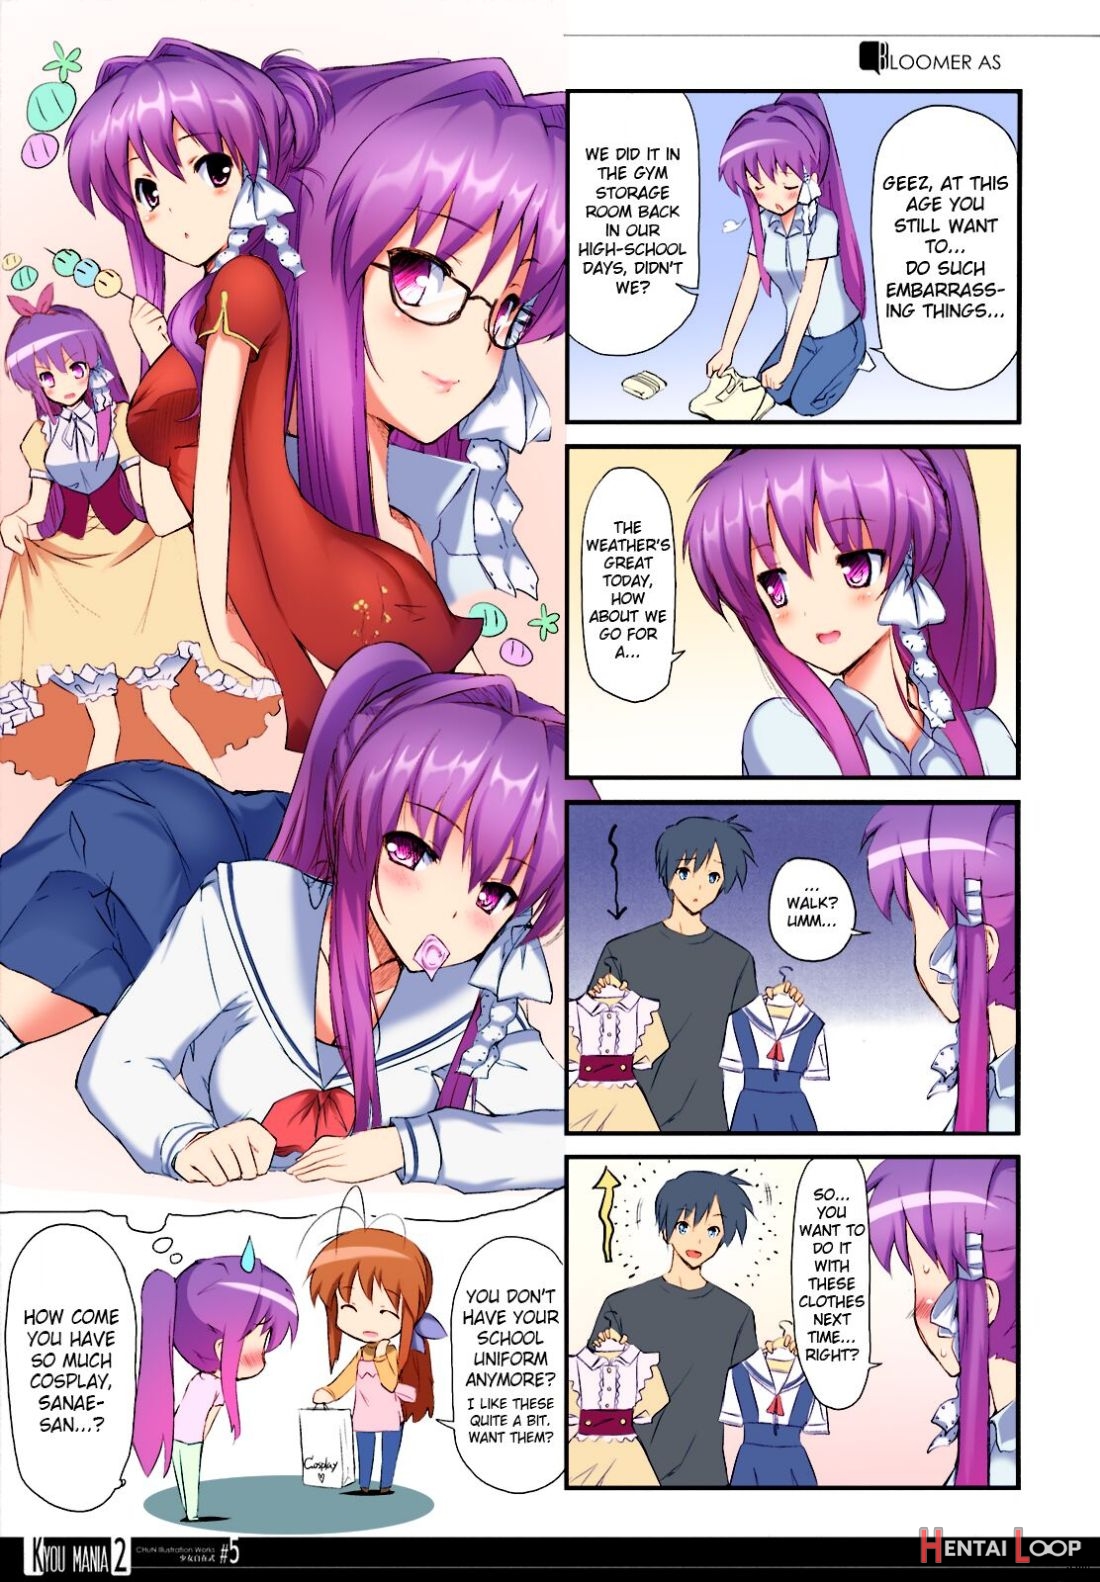 Kyou Mania 2 – Colorized page 22